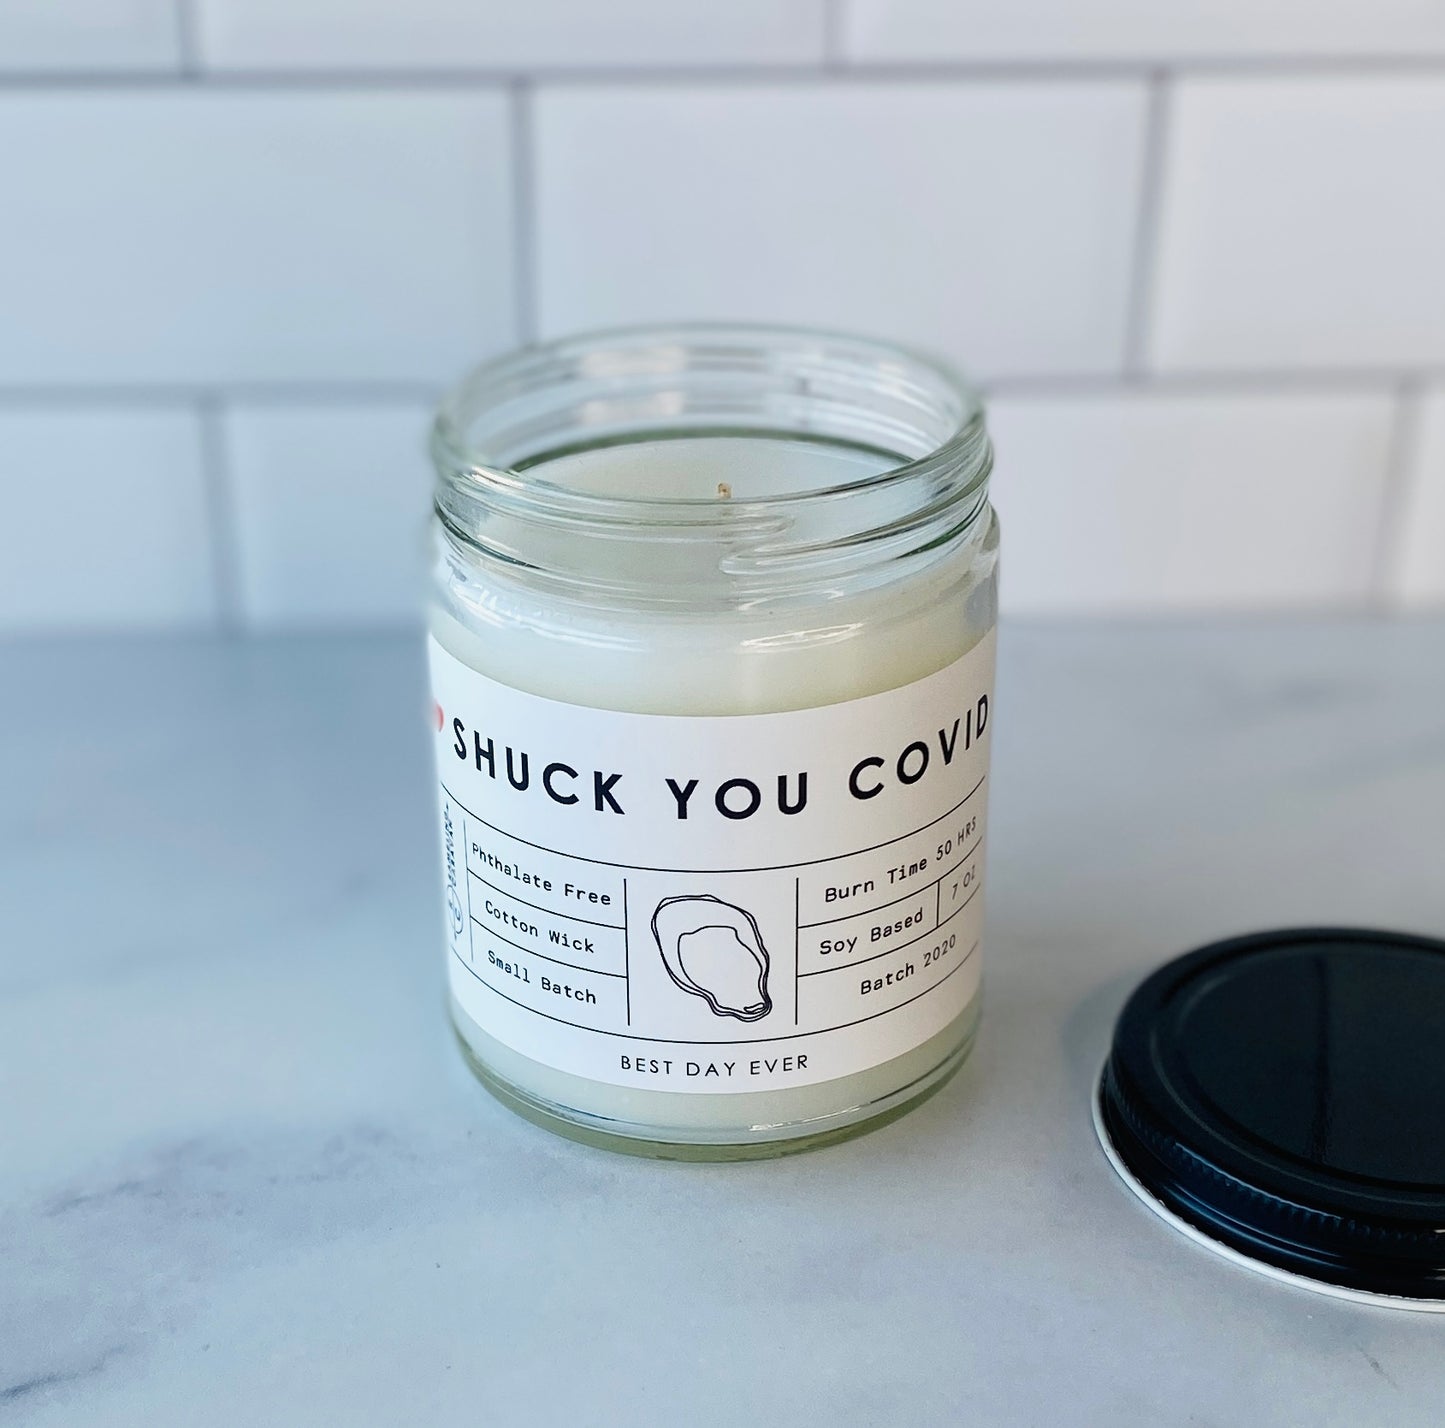 Shuck You Covid Candle